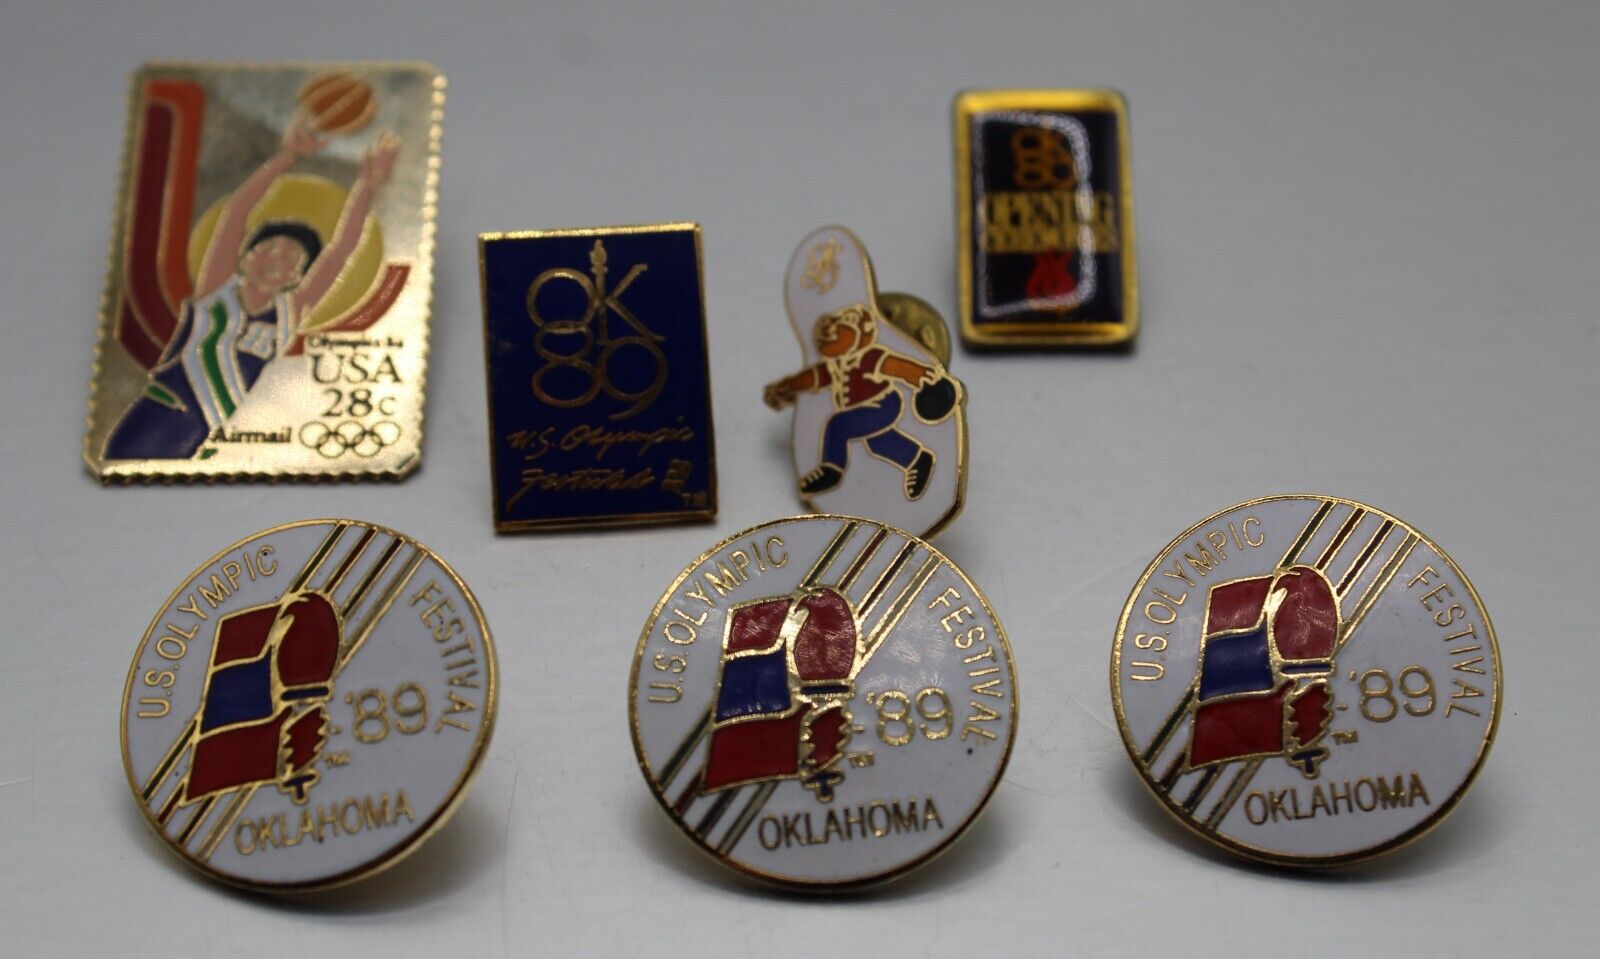 1989 Oklahoma City Olympic Festival OK89 Pin Lot of 7 Collection